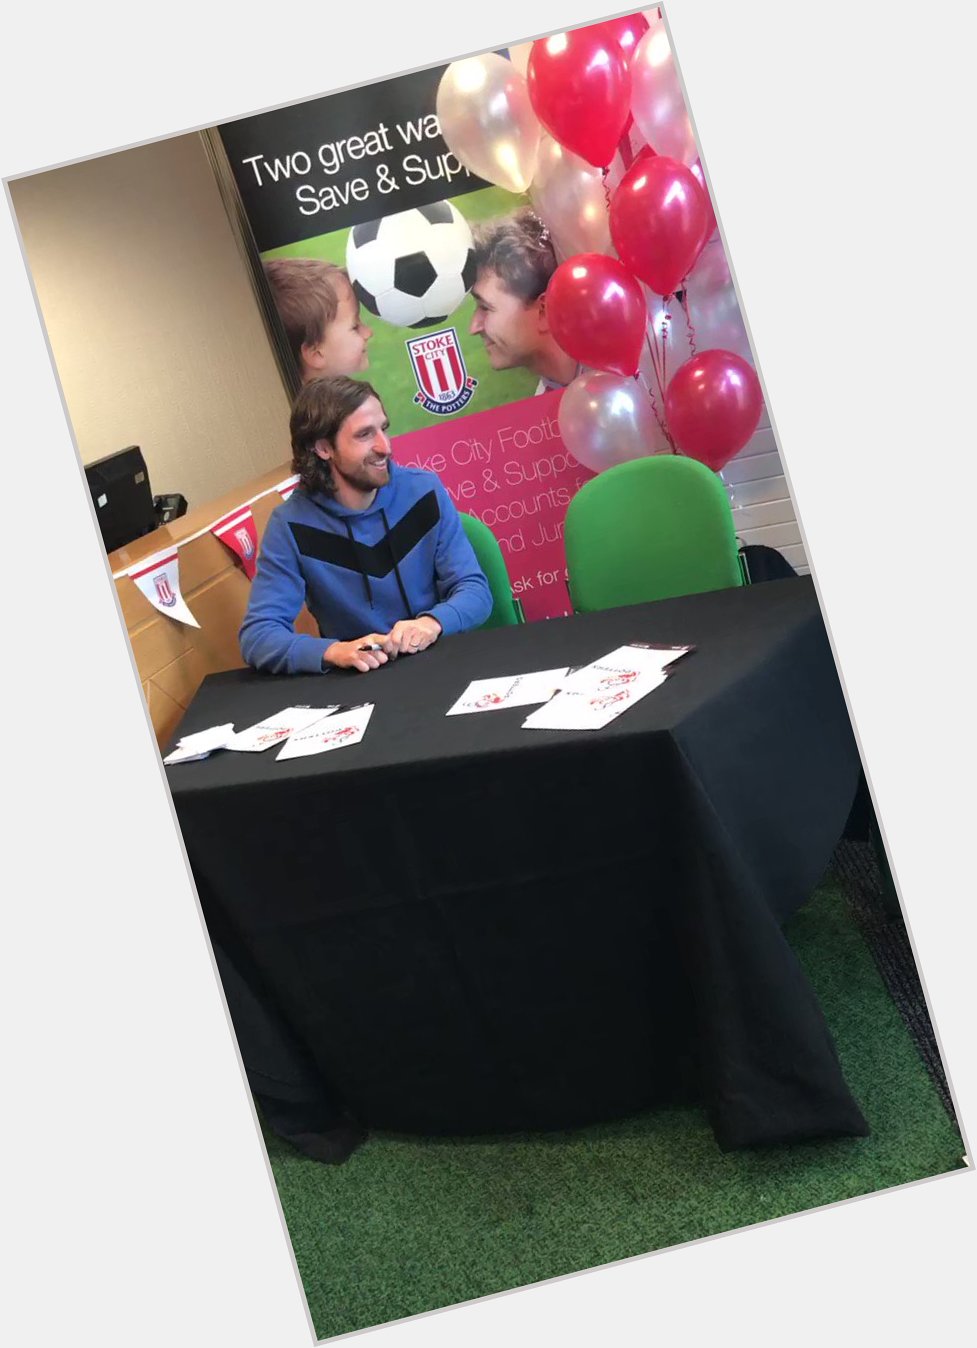 One very happy Potter met Joe Allen at LeekUnited earlier today...

And gets a happy birthday from the Welshman 